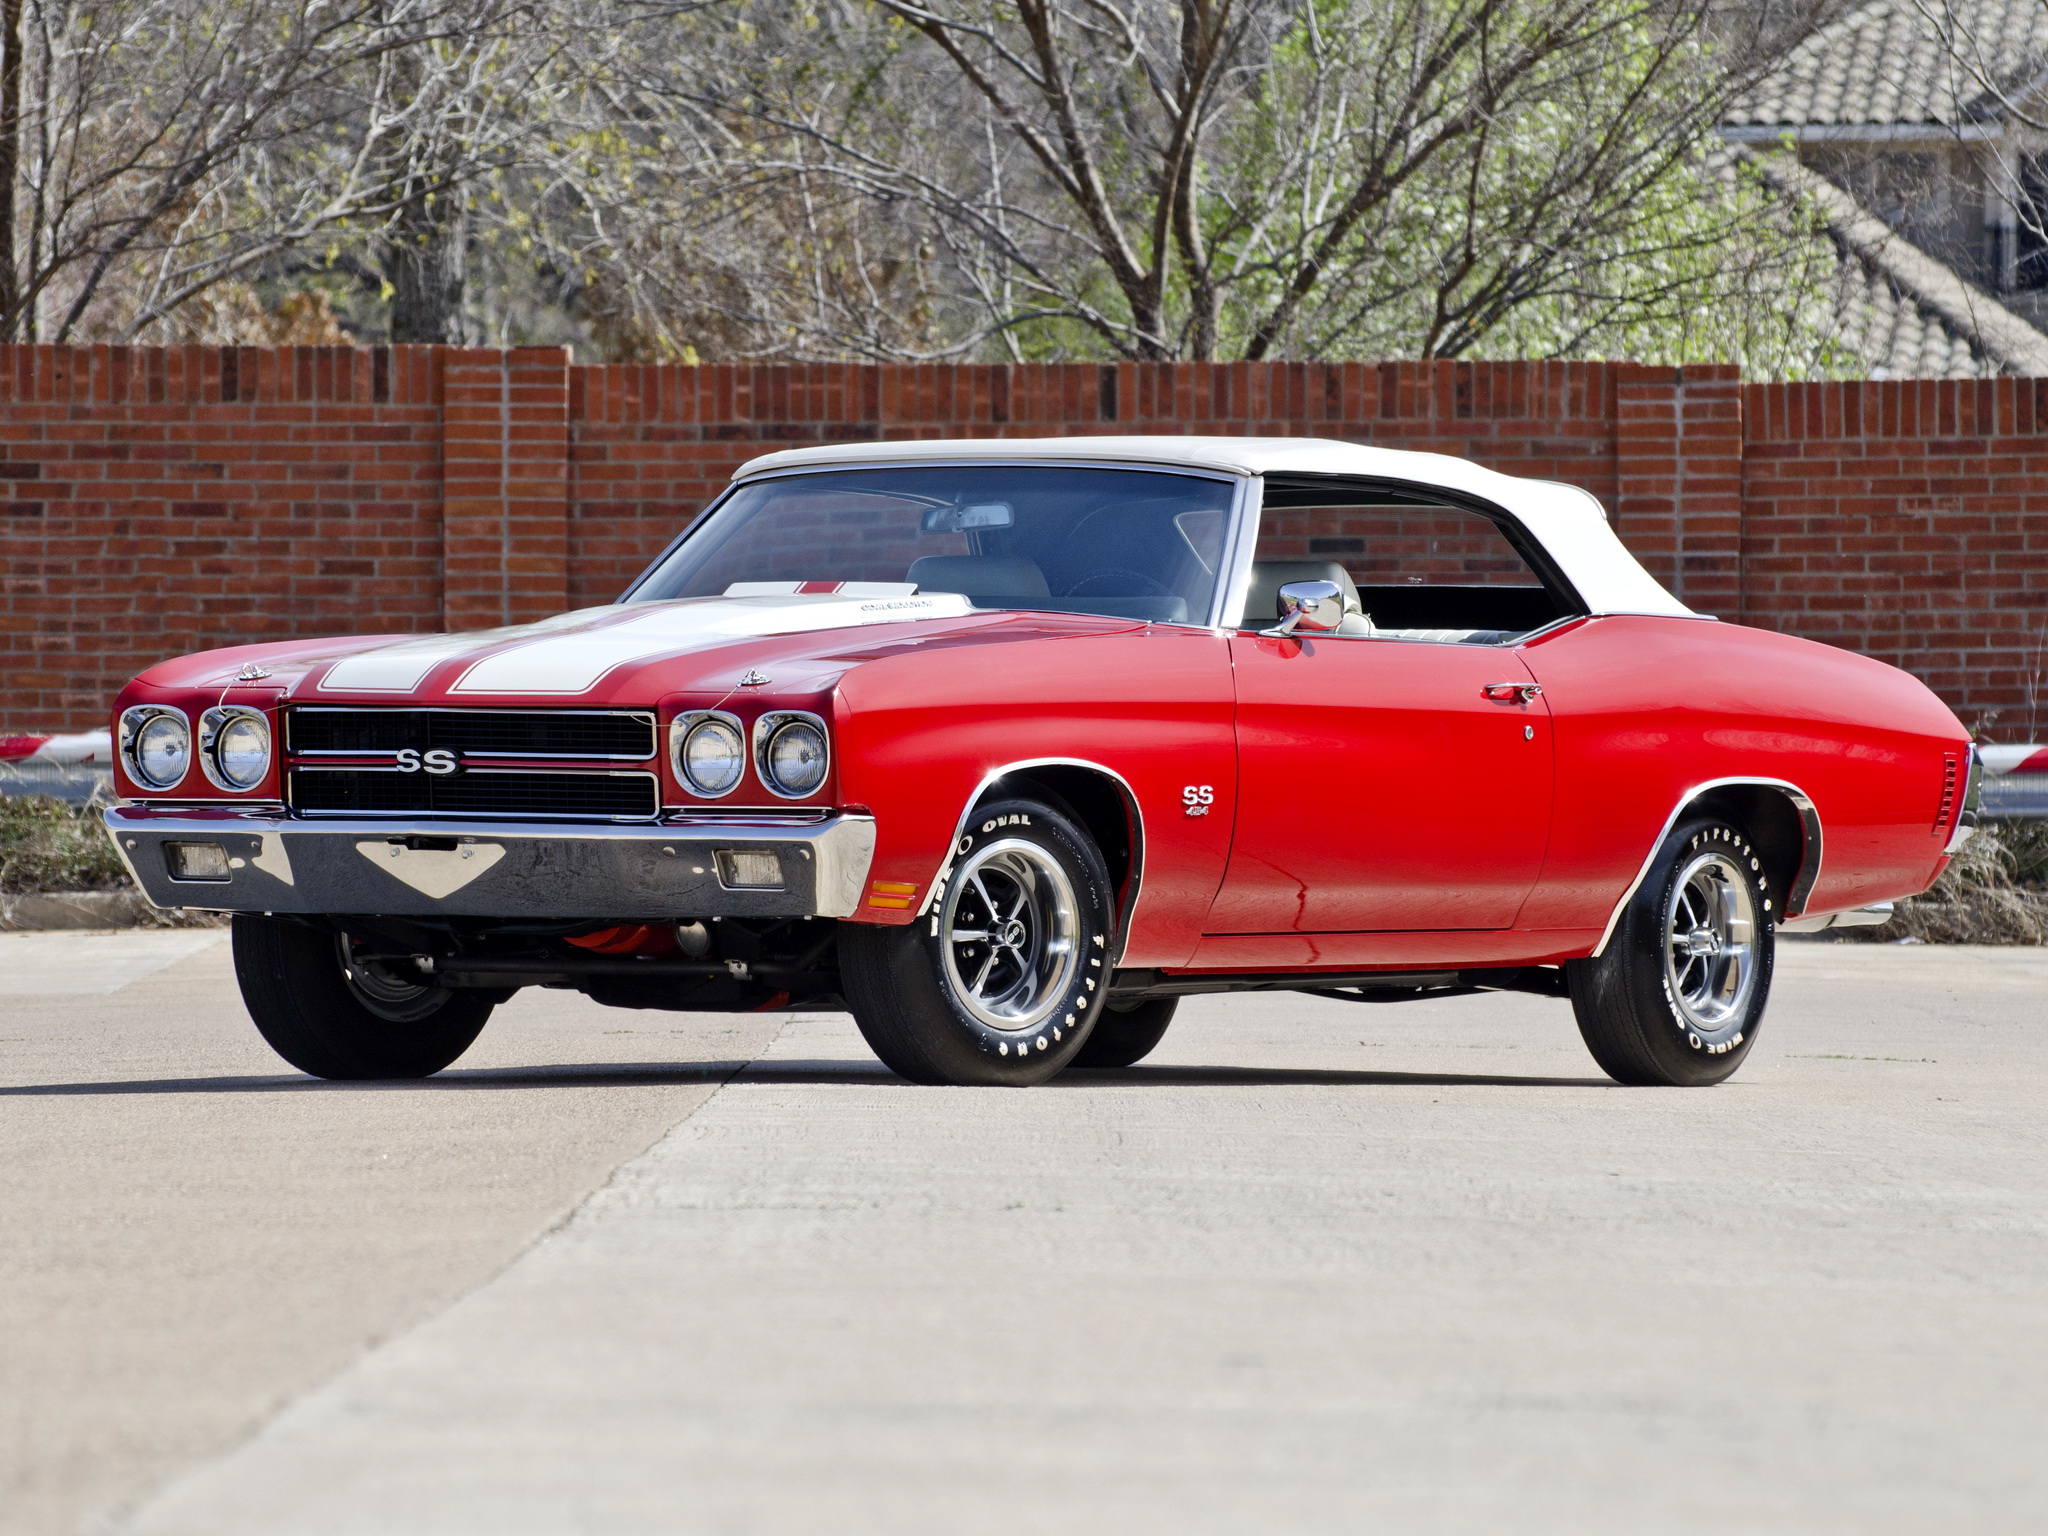 1970, Chevrolet, Chevelle, S s, 454, Ls6, Convertible, Muscle, Classic Wallpaper